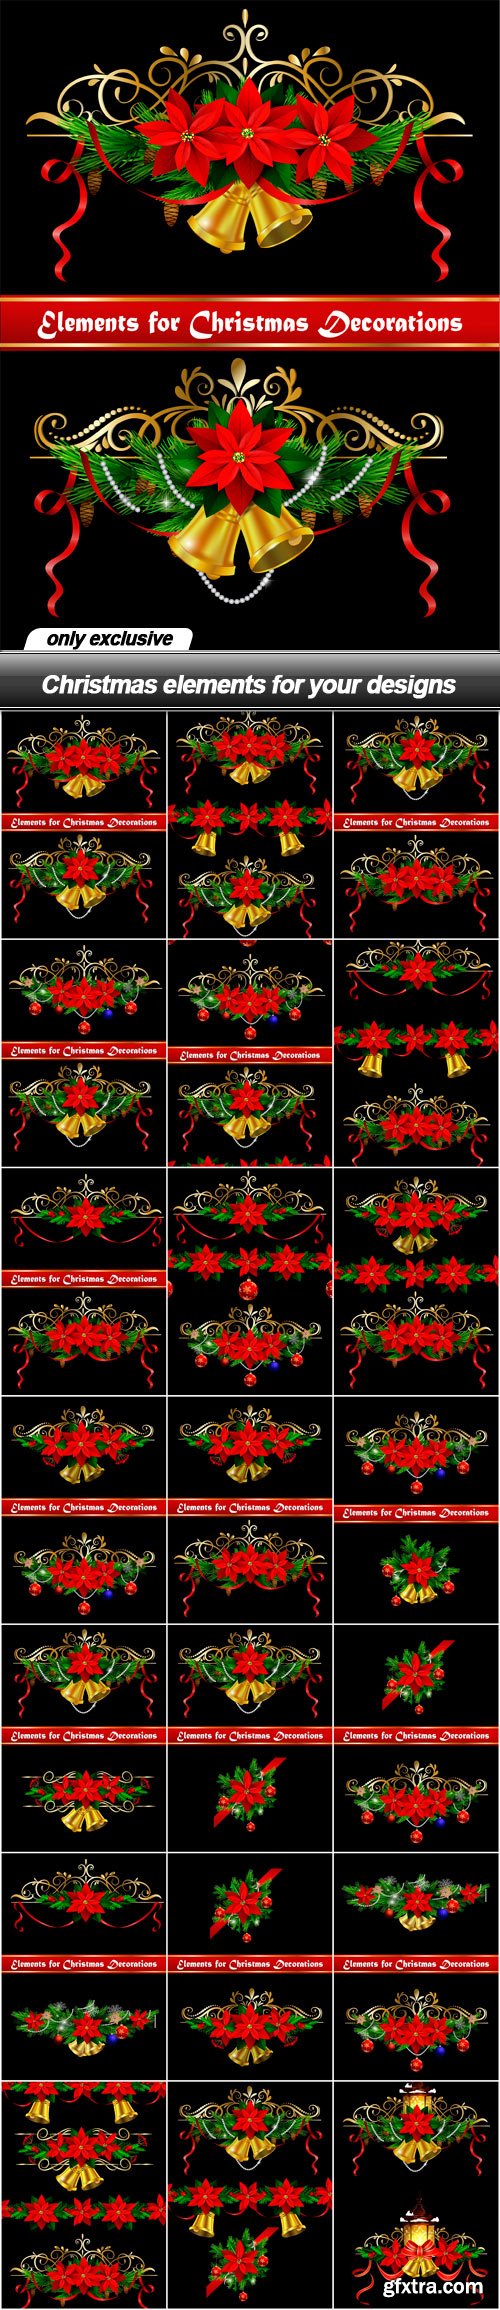 Christmas elements for your designs - 21 EPS